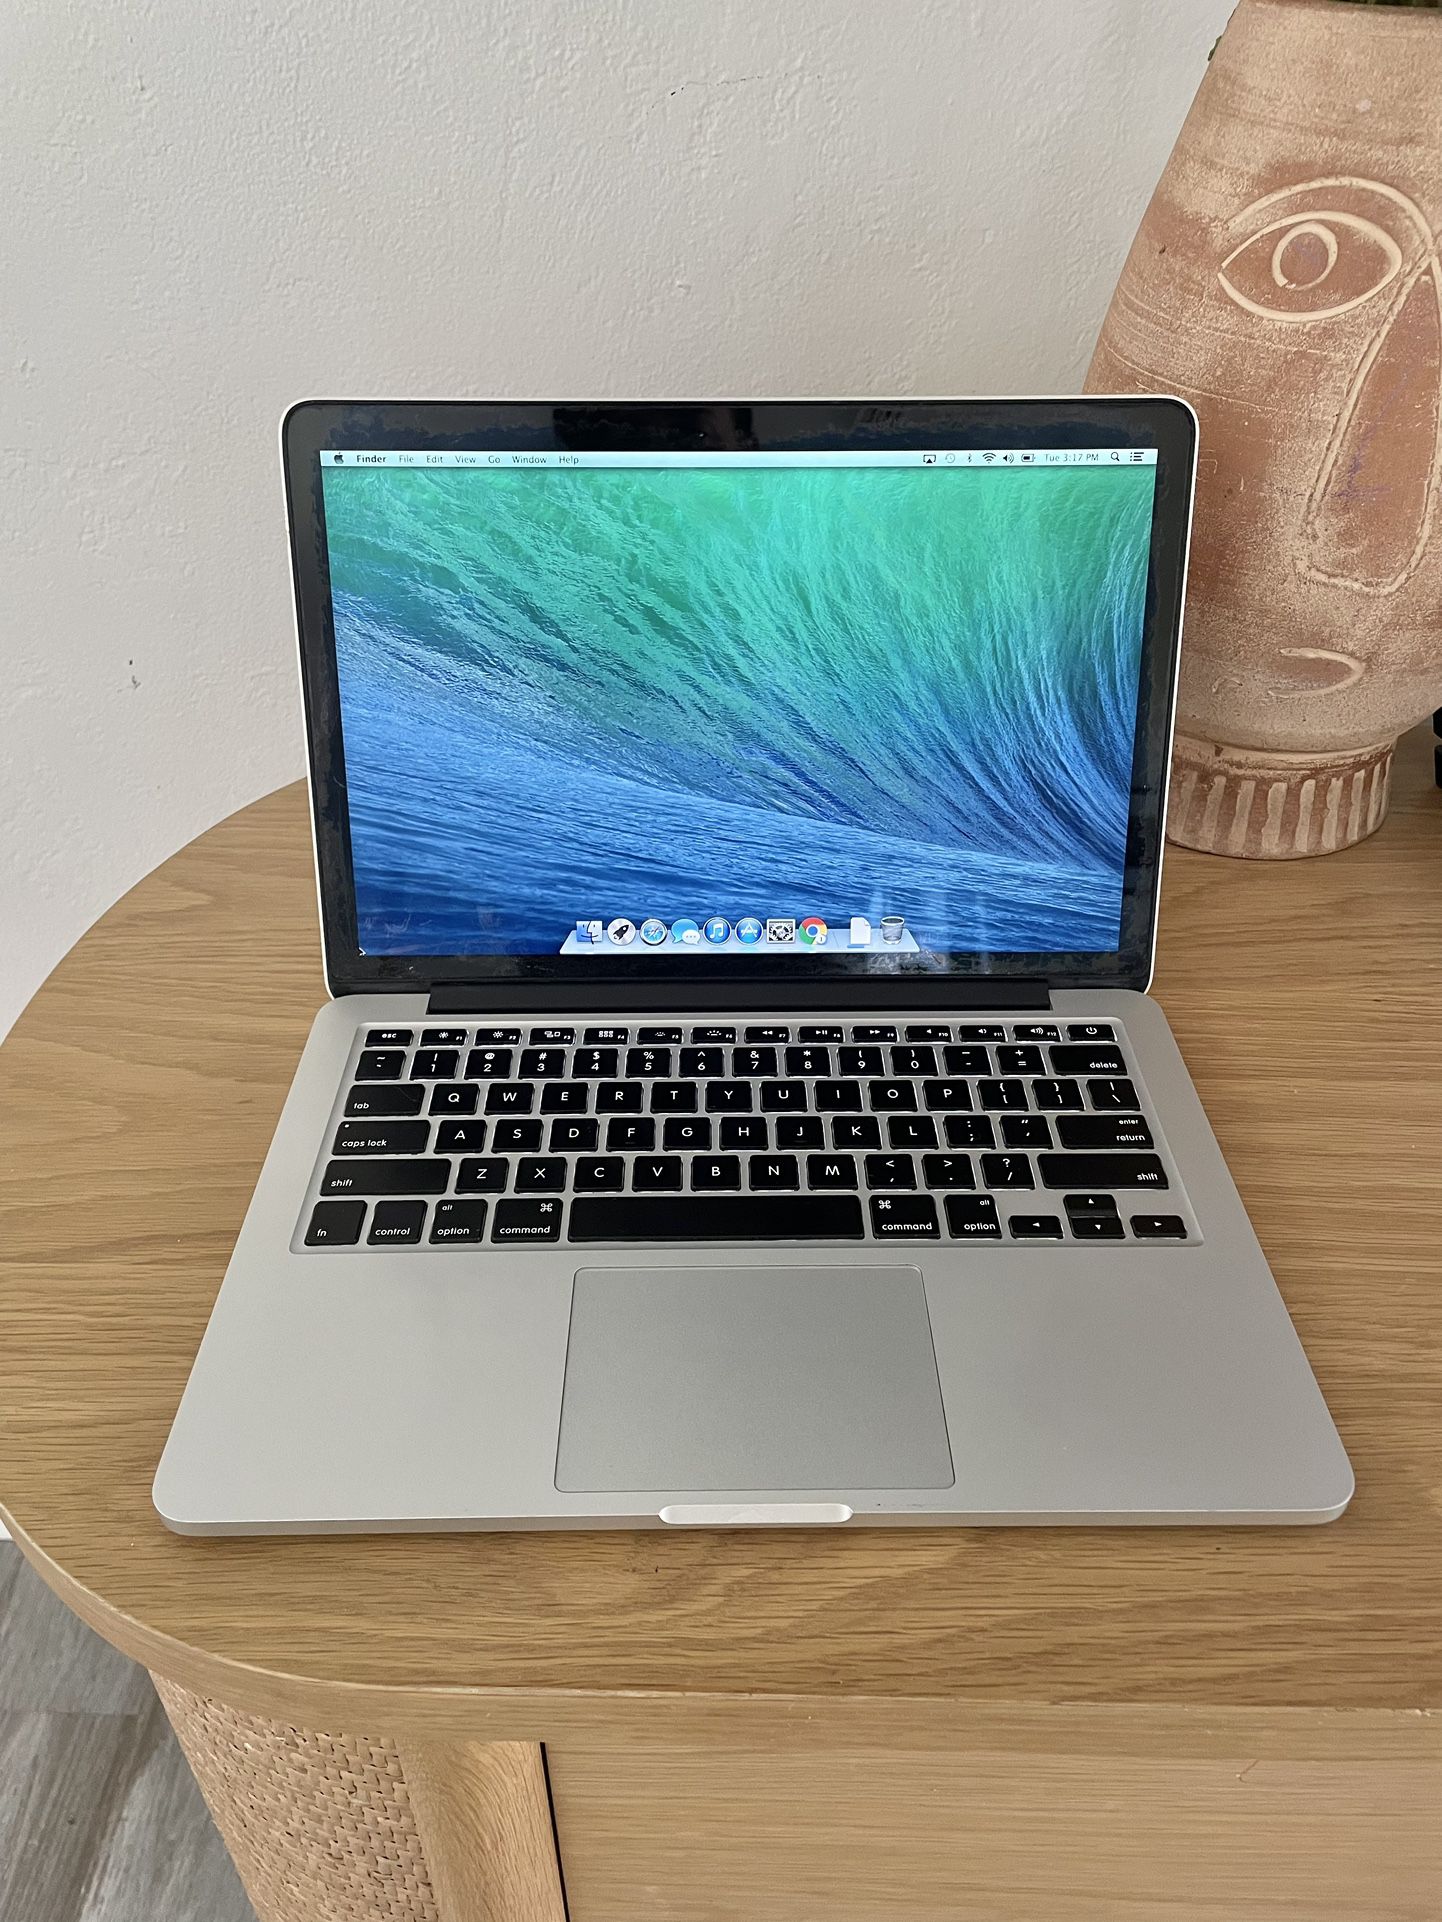 Apple MacBook Pro Late 2013 13" i5-2435M 2.4GHz 4GB - Silver